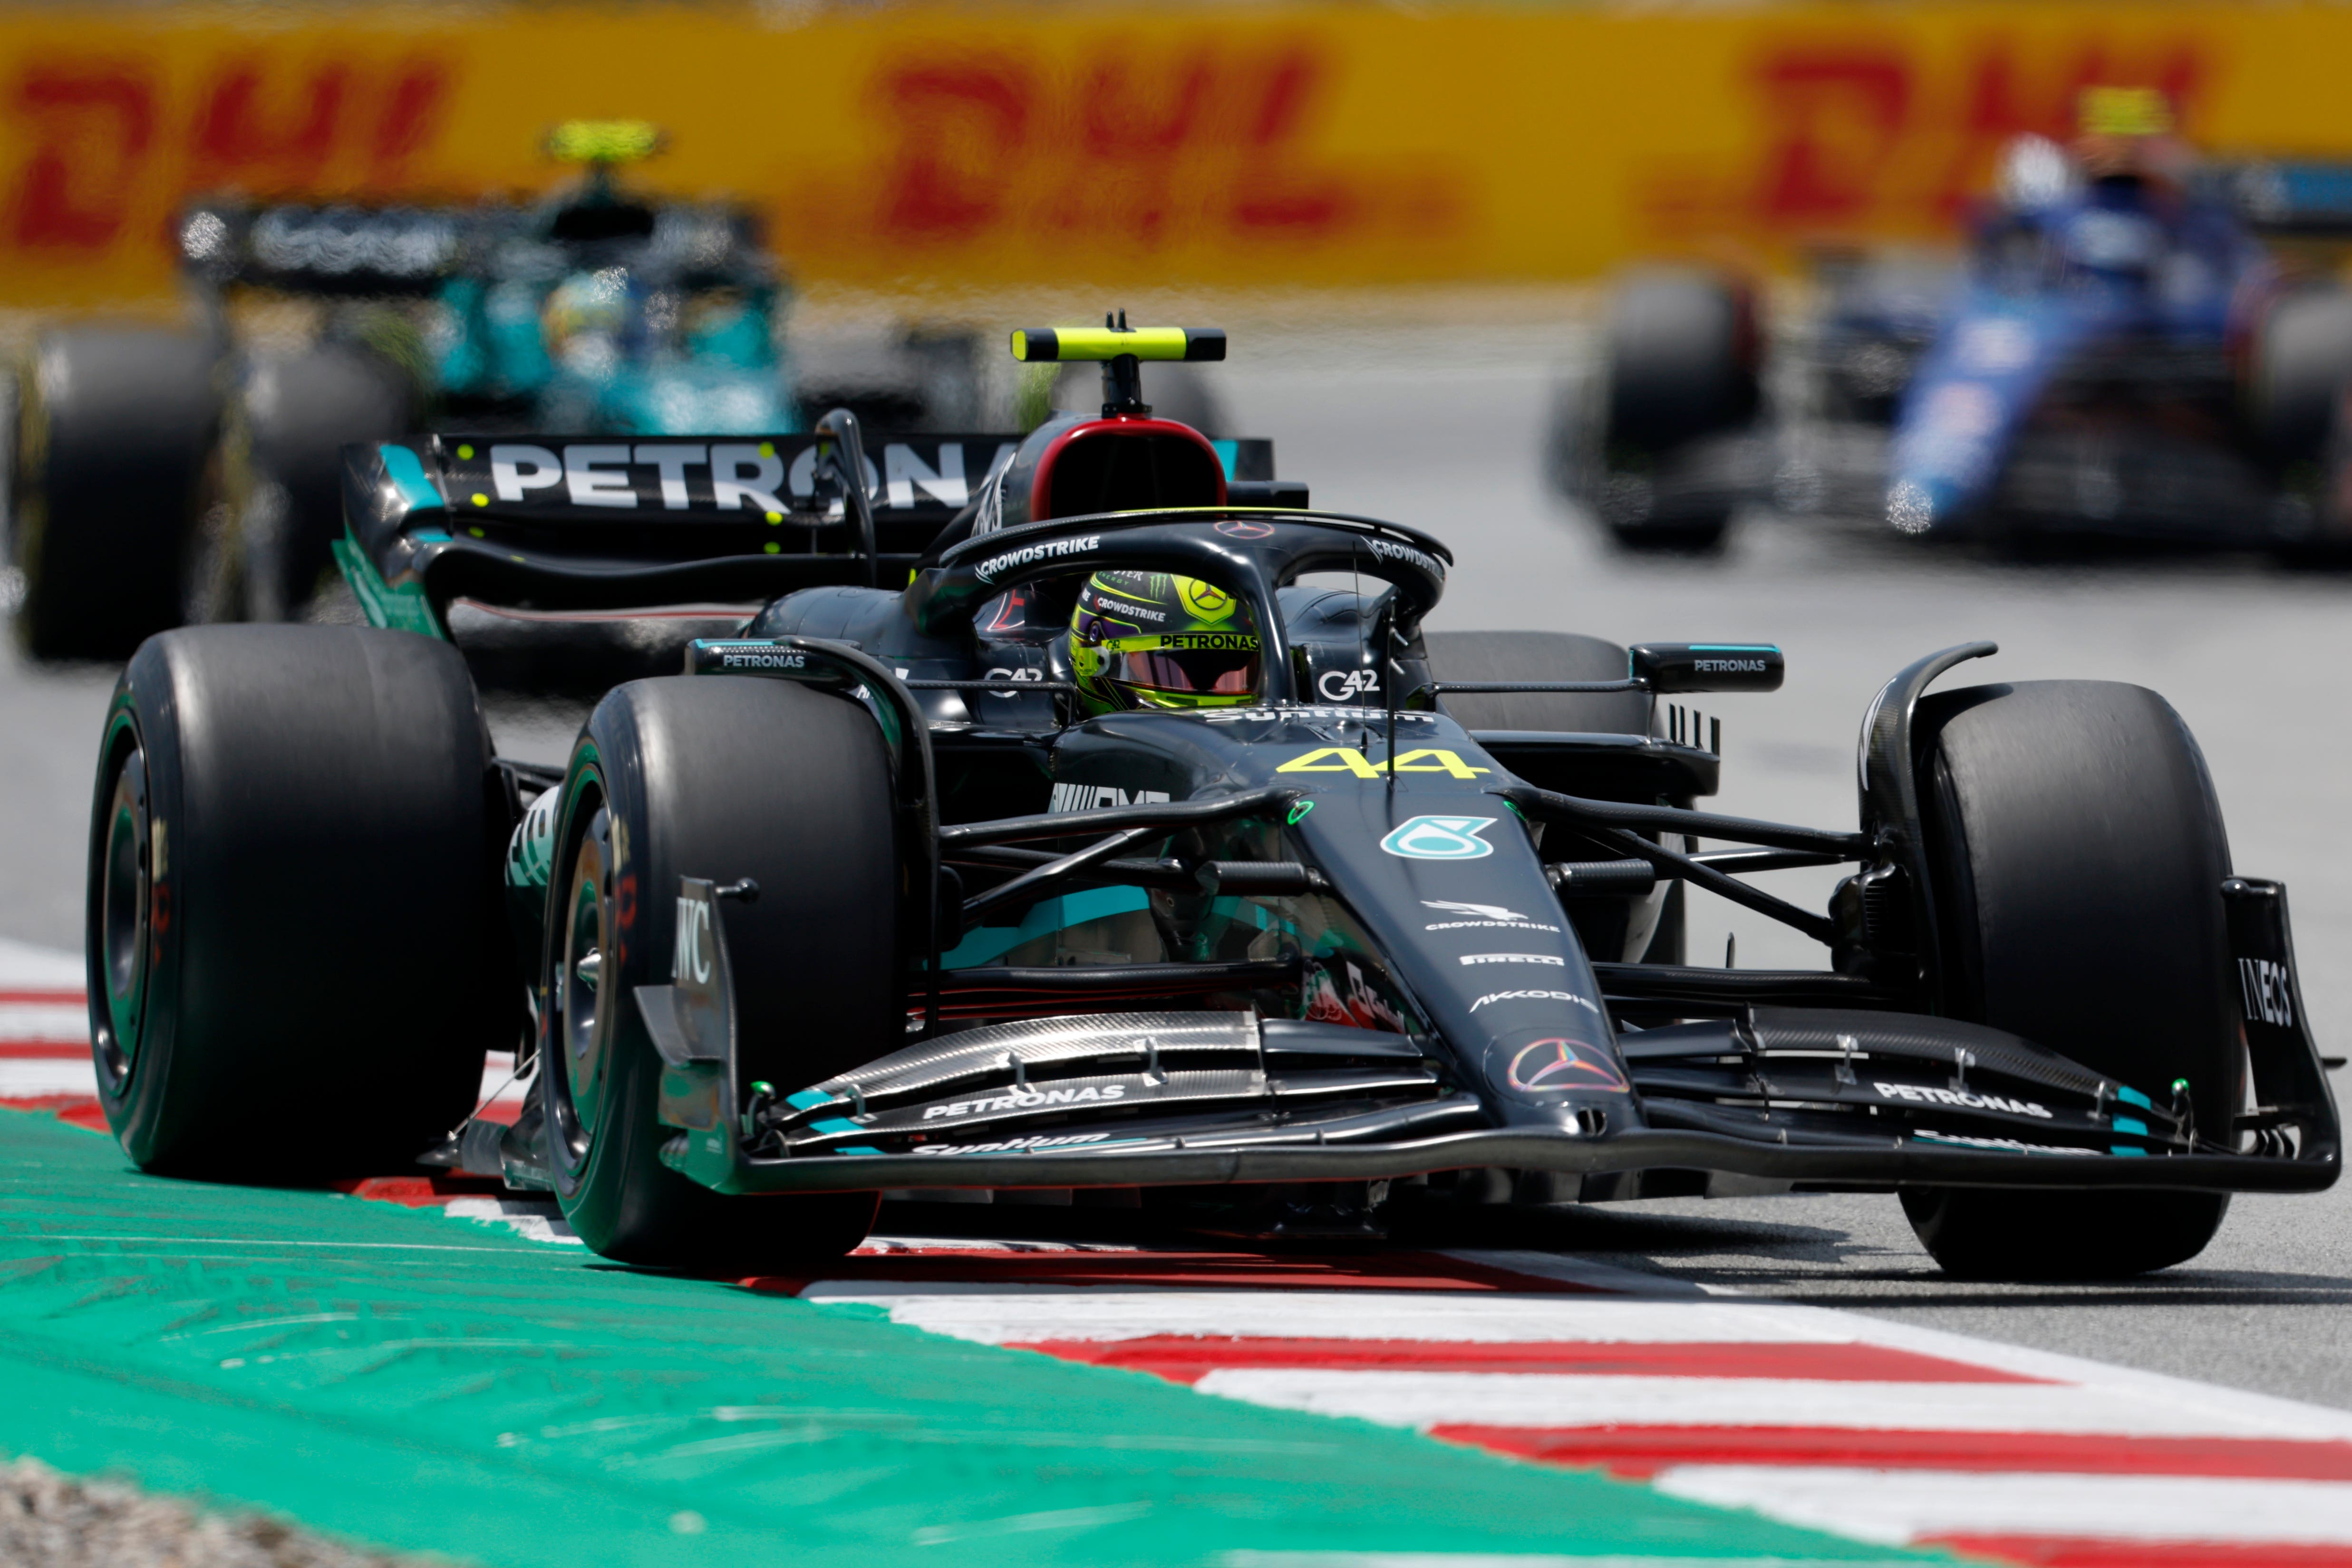 Lewis Hamilton toils in 12th as Max Verstappen and Red Bull dominate in Spain The Independent